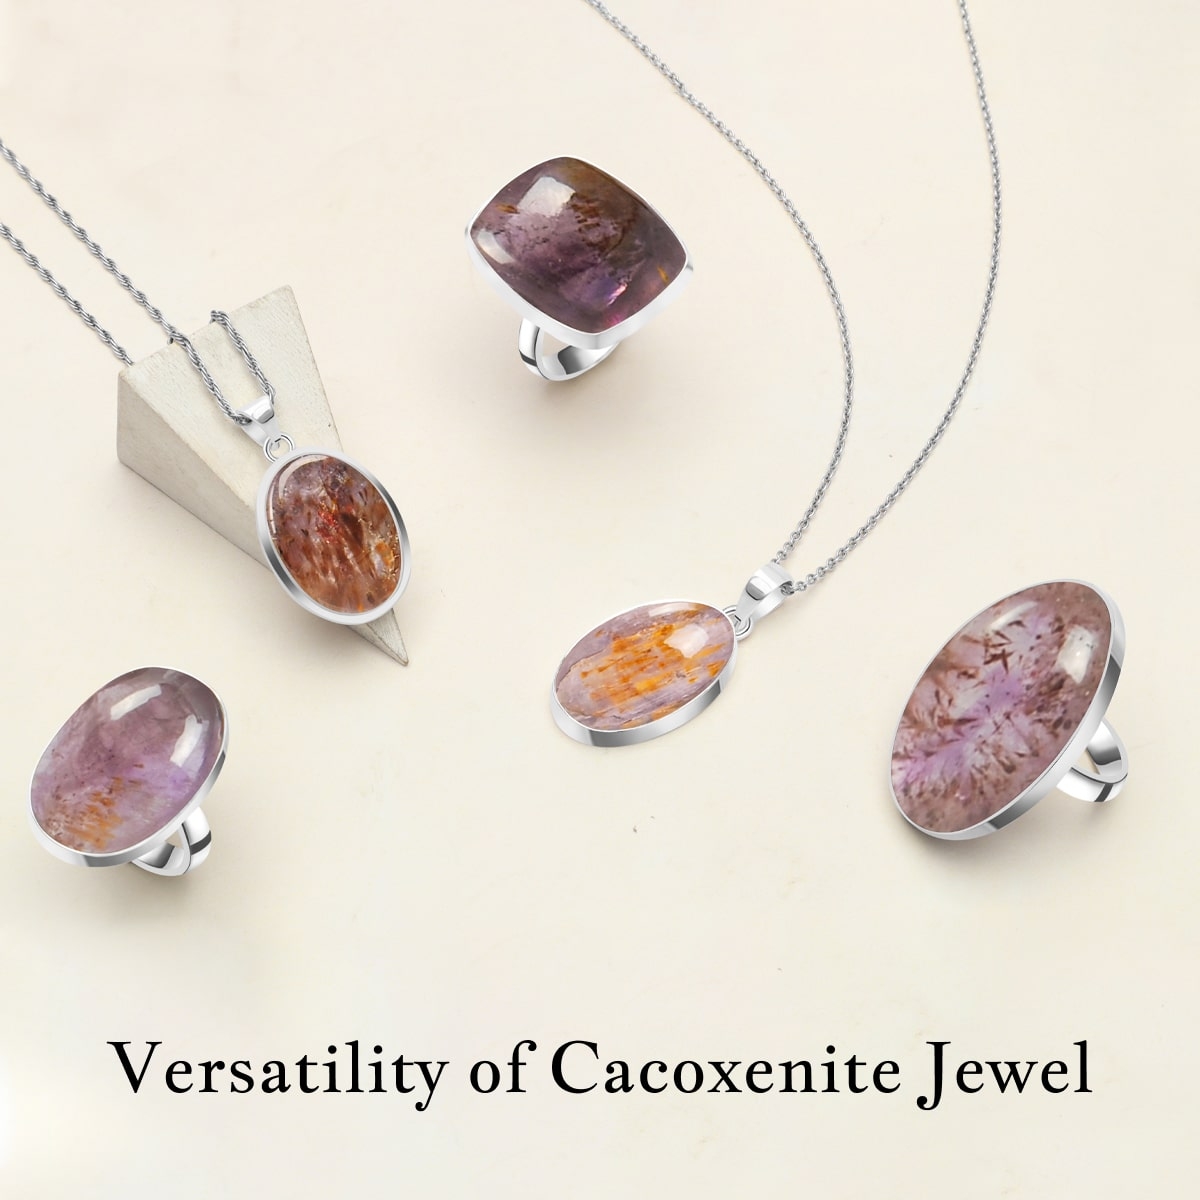 Uses of Cacoxenite Jewel